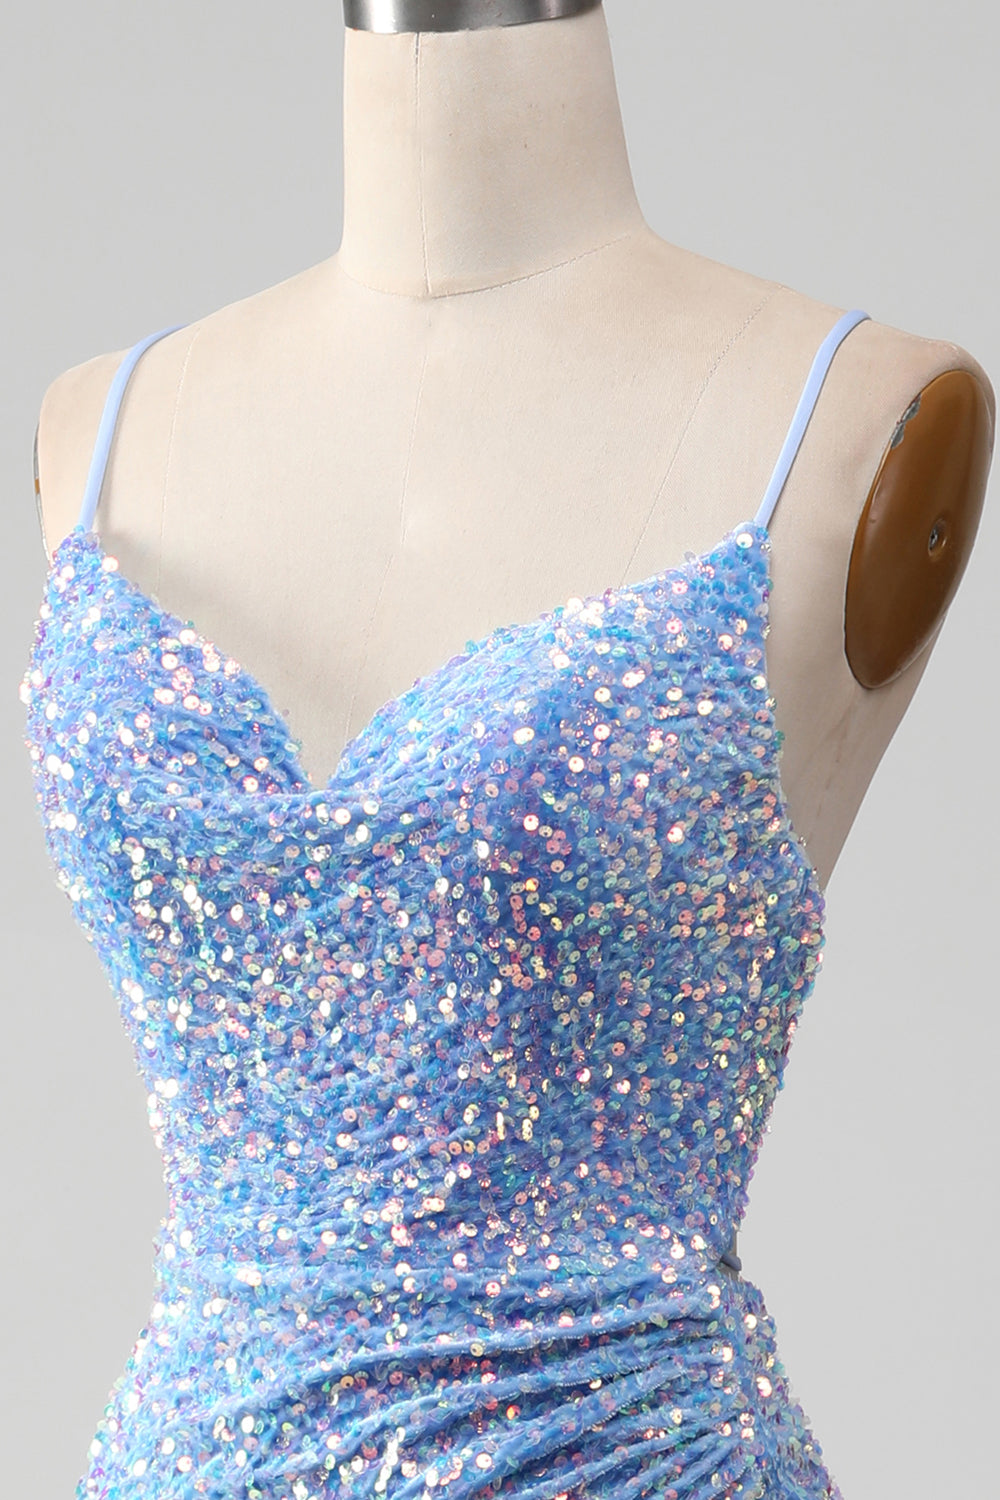 Sparkly Sequins Mermaid Light Blue Prom Dress with Slit